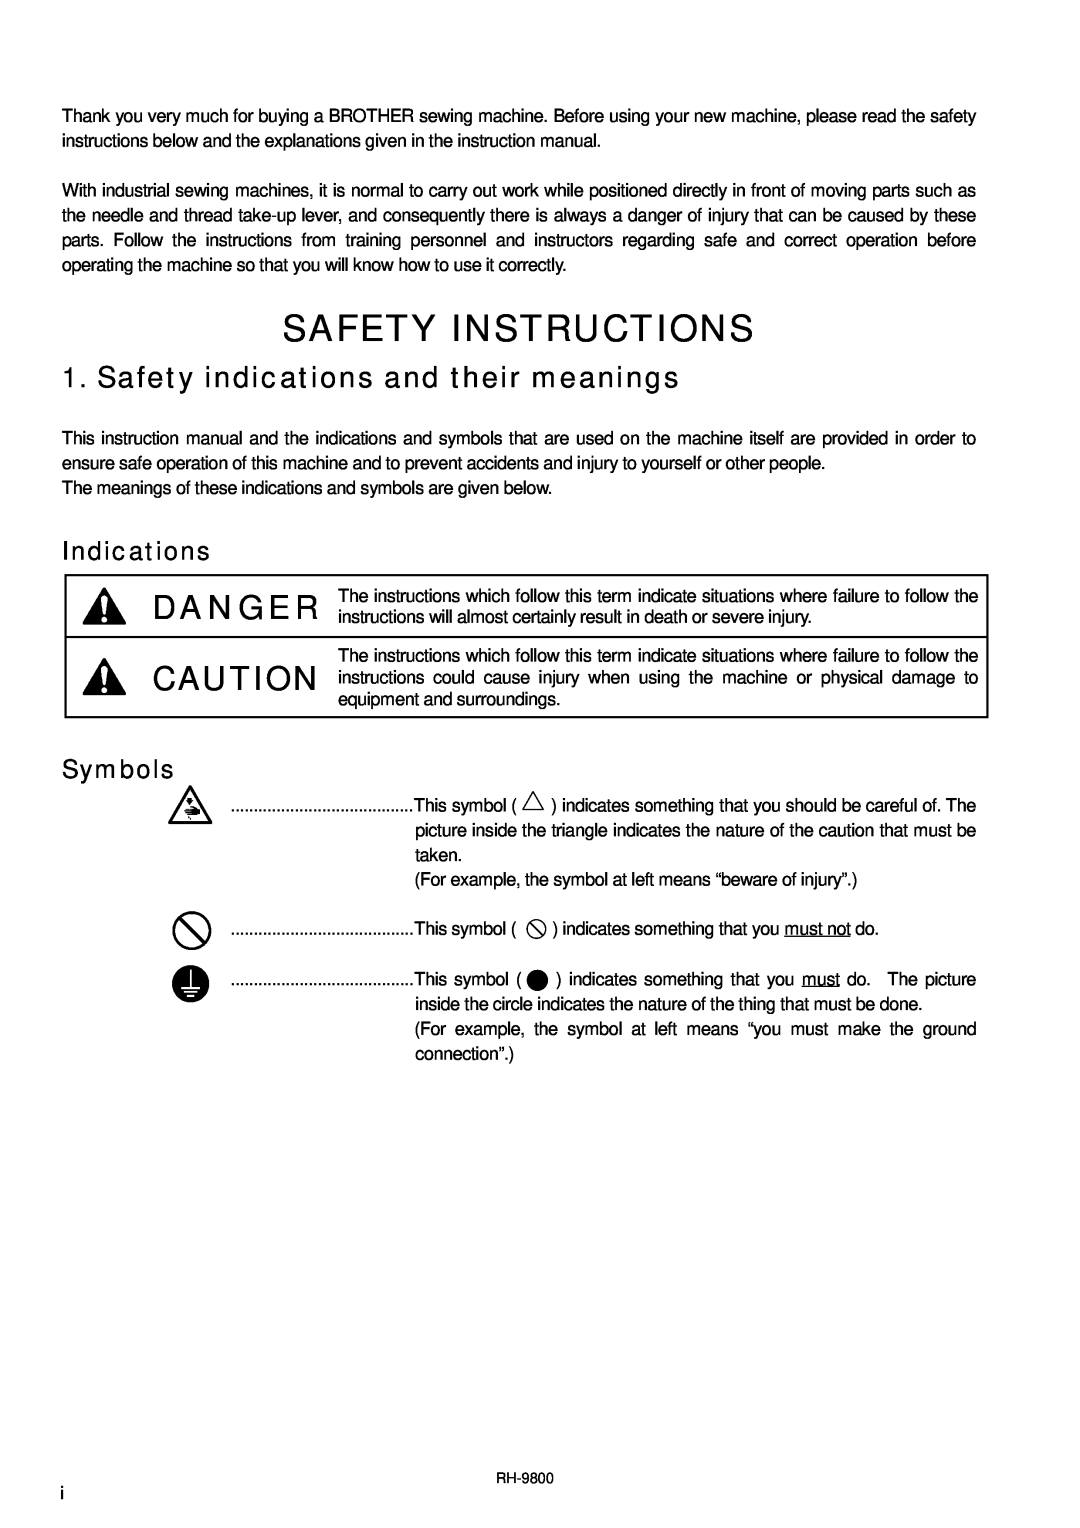 Brother DH4-B980 instruction manual Safety Instructions, Safety indications and their meanings, Indications, Symbols 